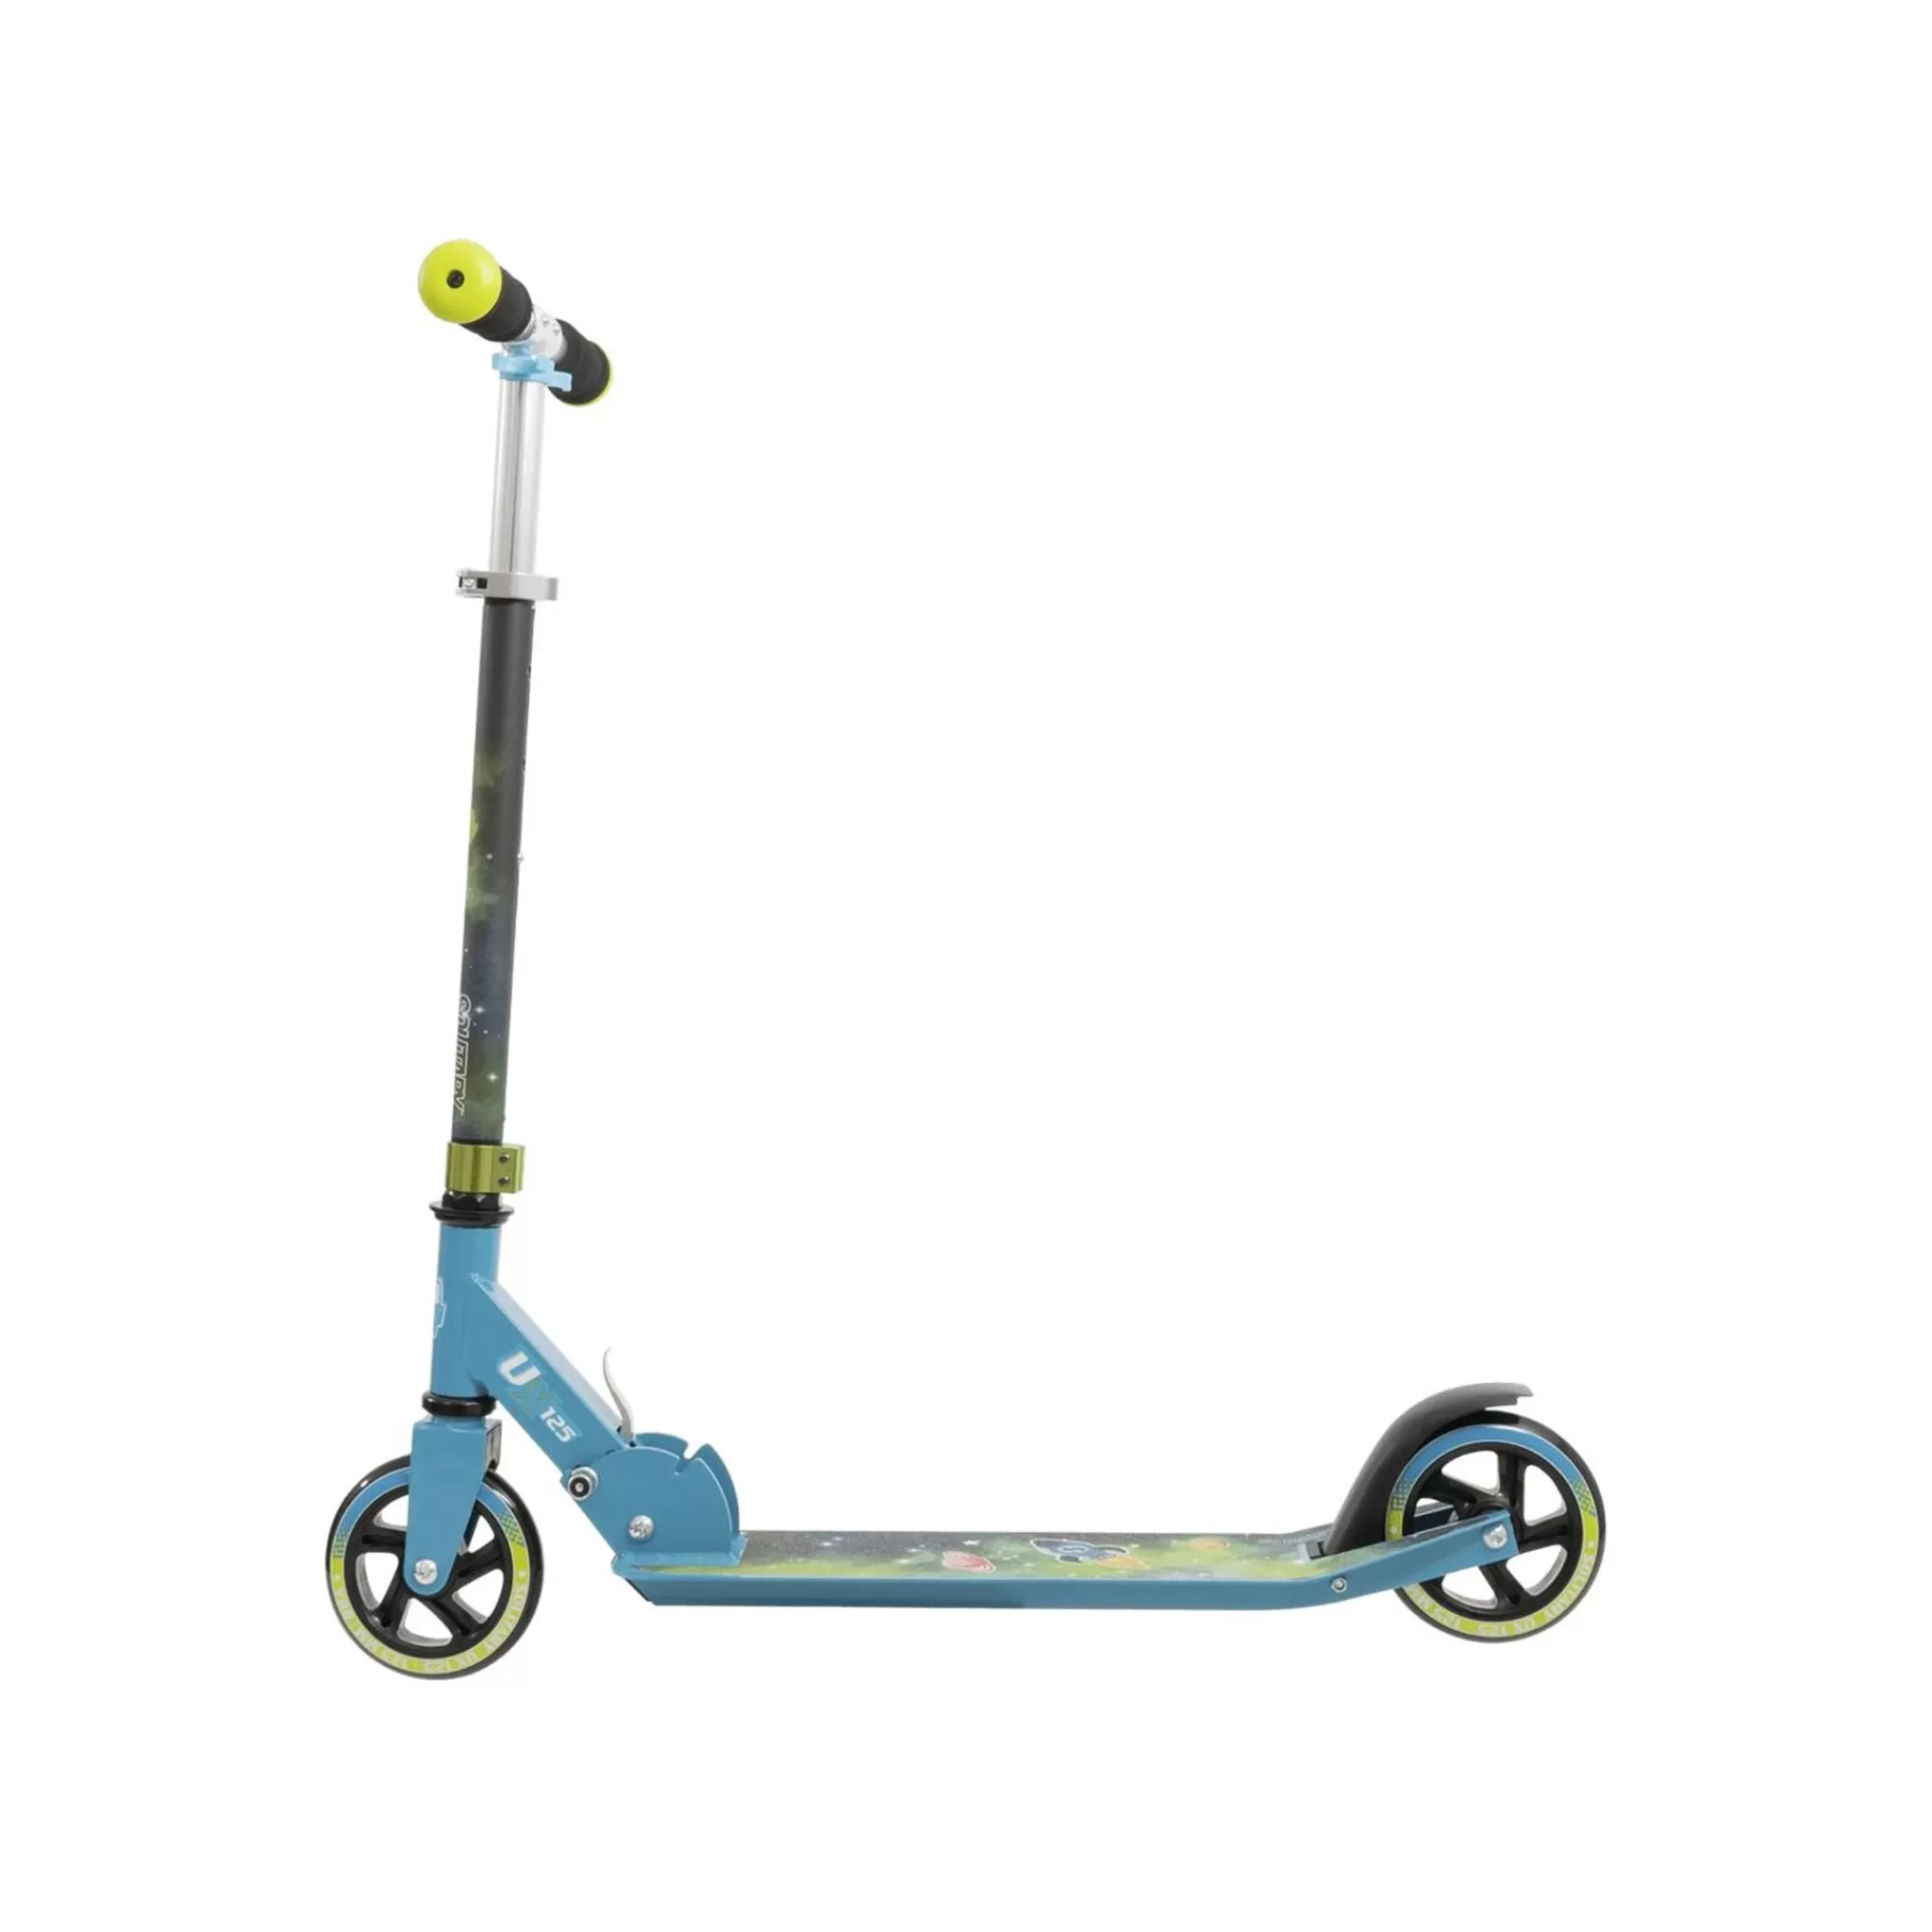 New Solitary Ux 125 Kid Scooter, Sparkesykkel, Scooter, Barn